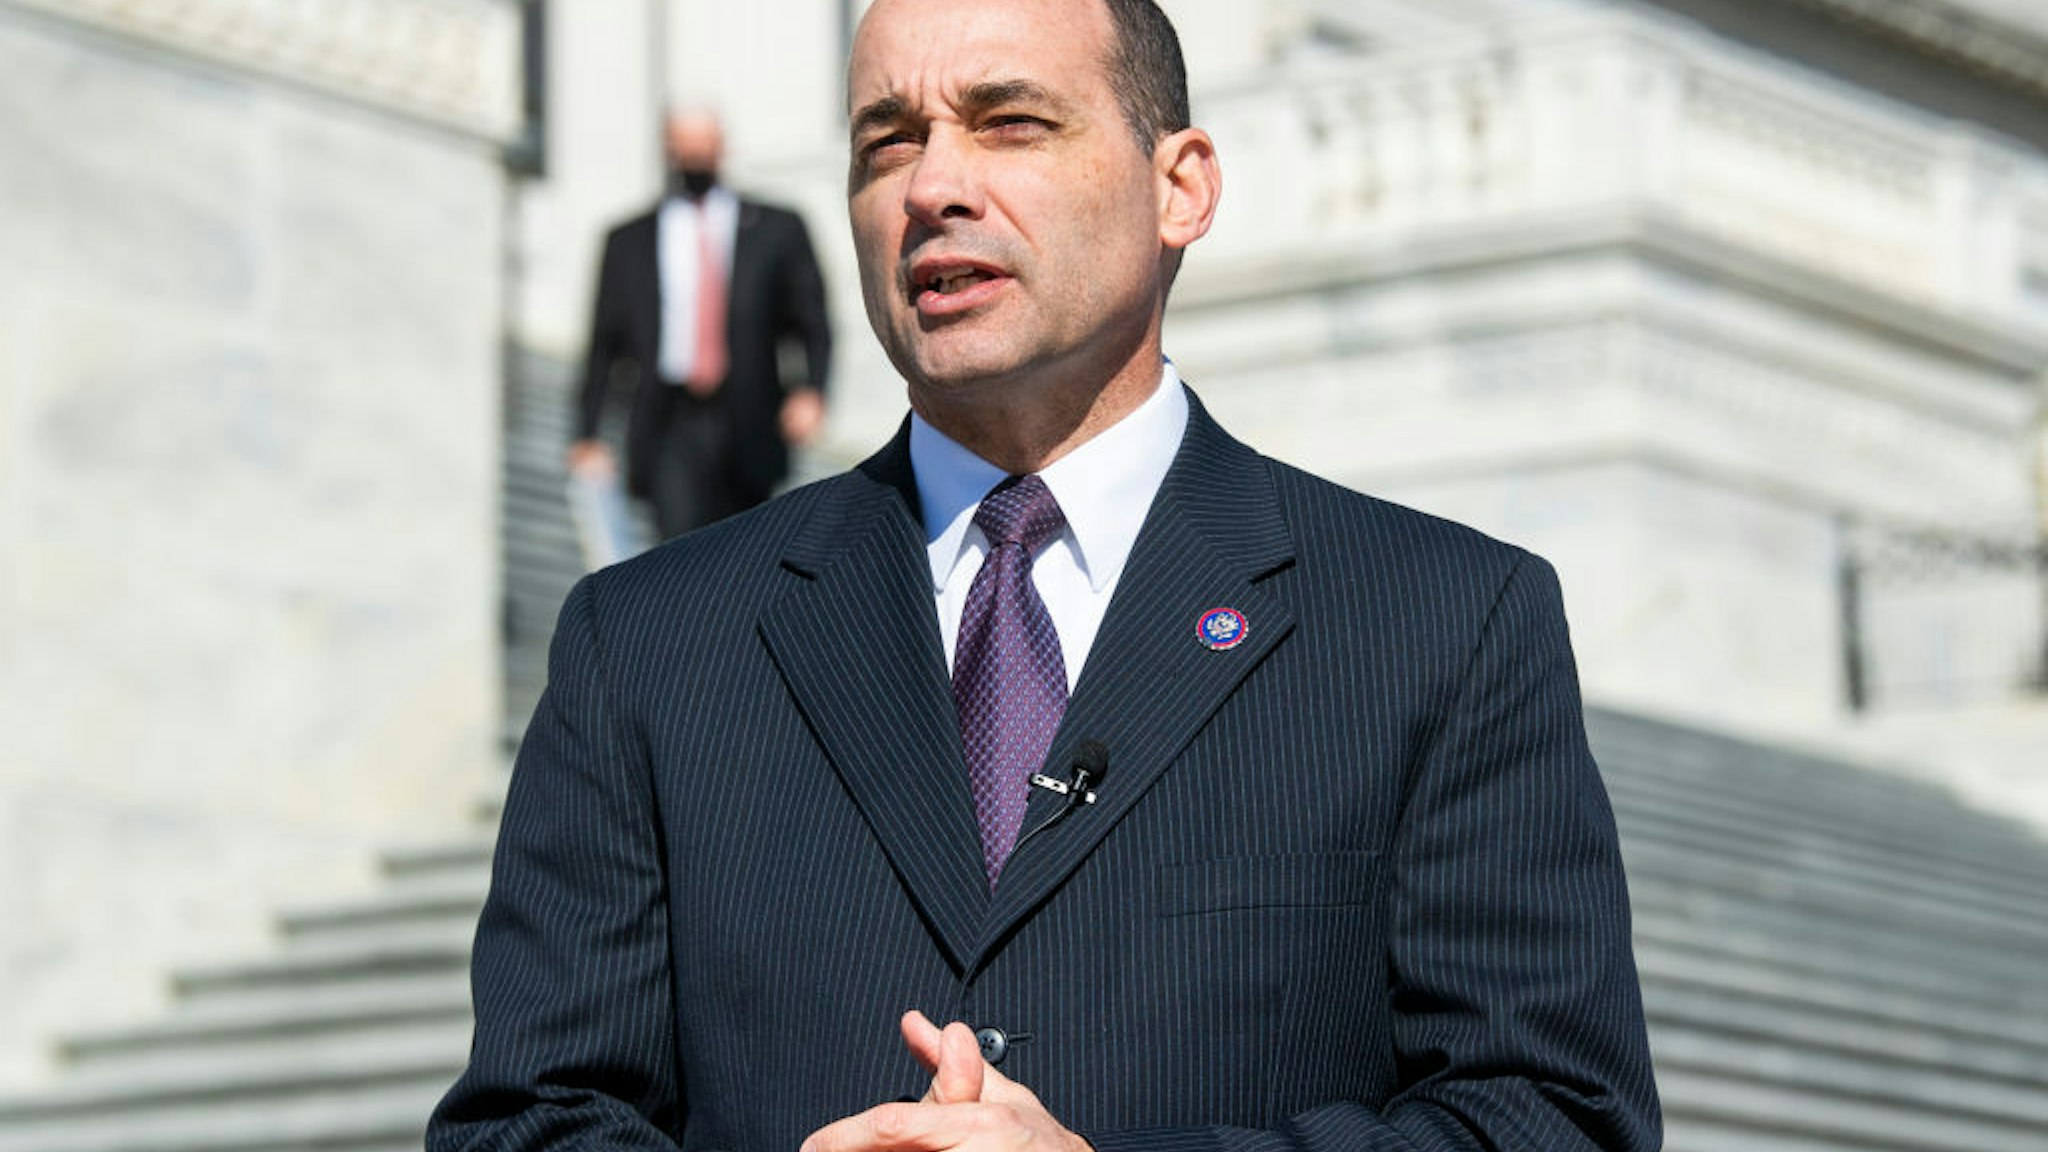 UNITED STATES - FEBRUARY 25: Rep. Bob Good, R-Va., is seen after a news conference with members of the House Freedom Caucus outside the Capitol to oppose the Equality Act, which prohibits discrimination on the basis of sex, gender identity, and sexual orientation, on Thursday February 25, 2021.